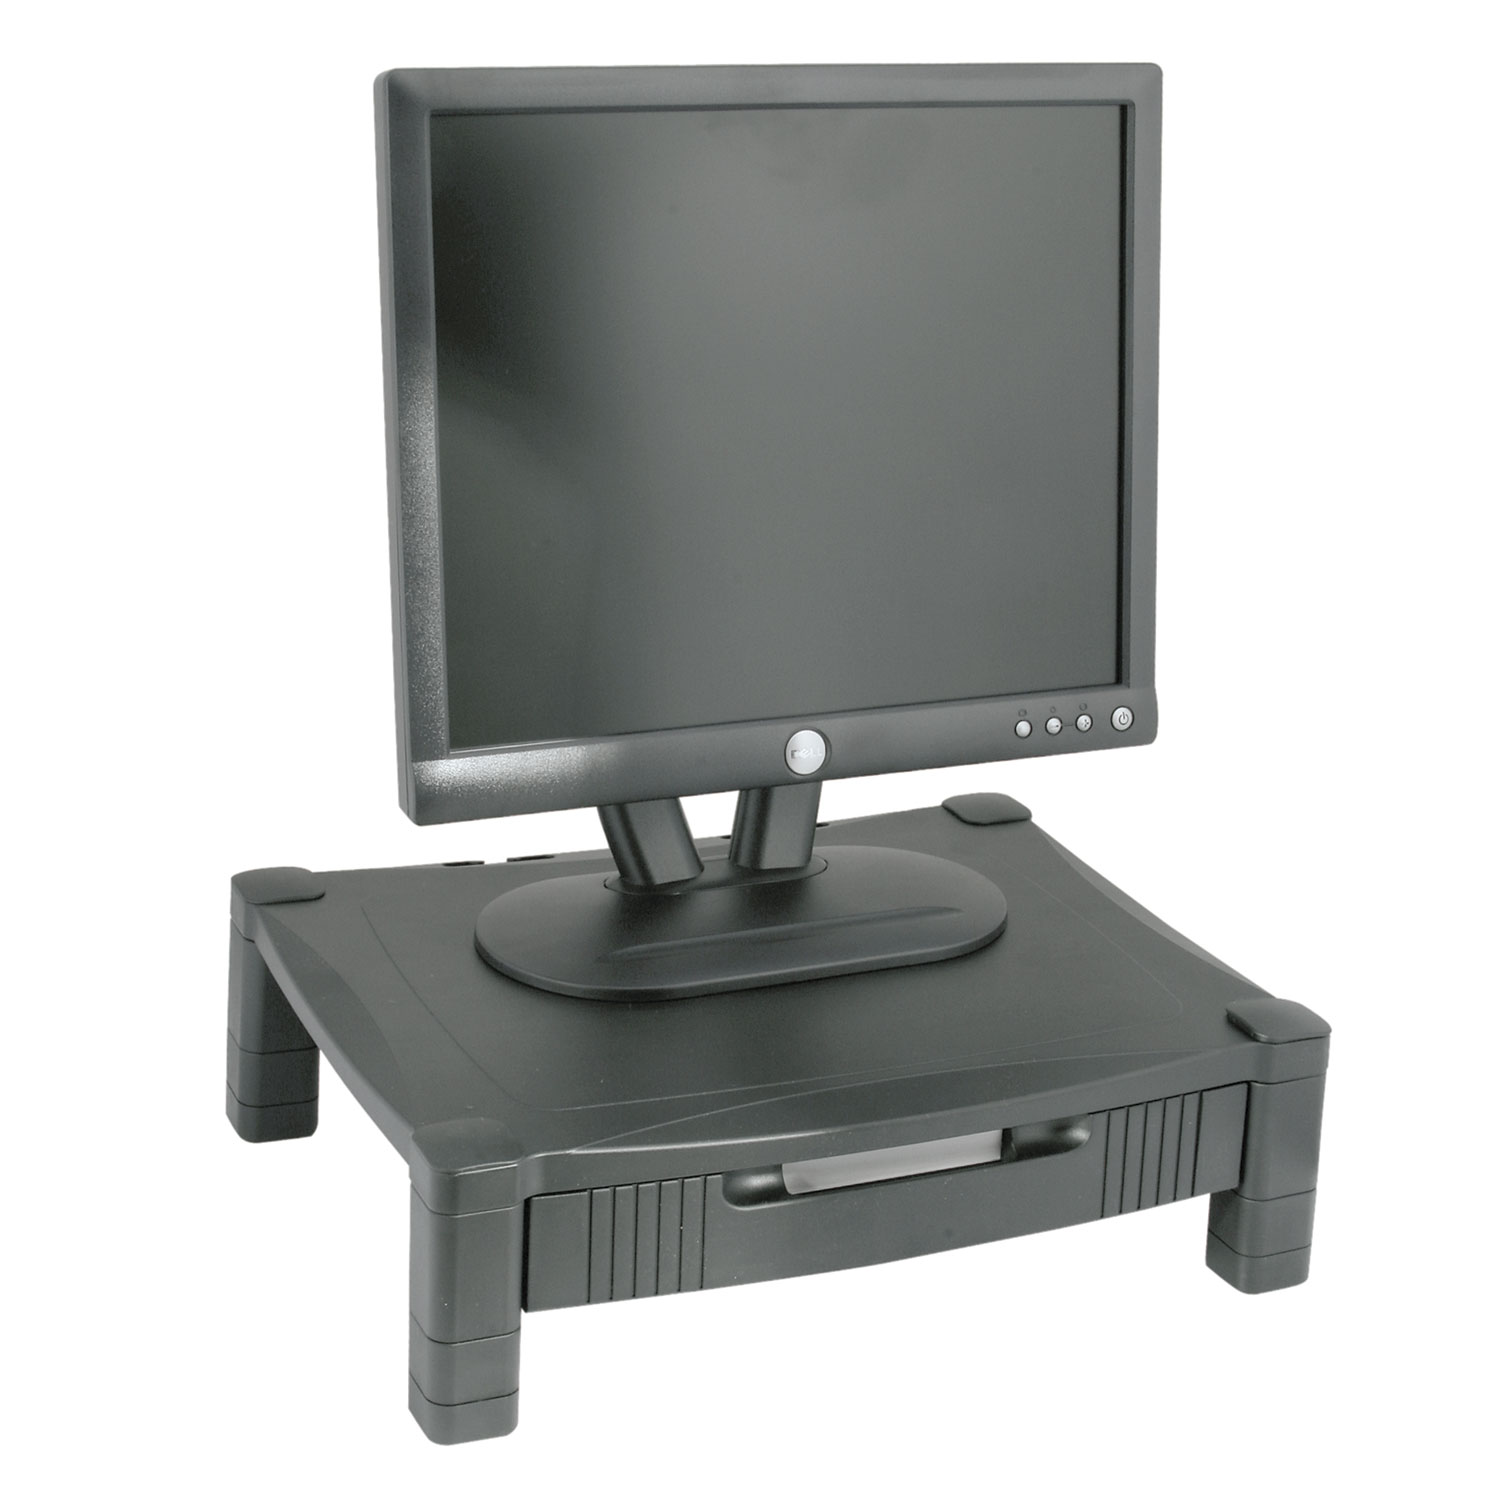  Kantek MS420 Height-Adjustable Stand with Drawer, 17 x 13 1/4 x 3 to 6 1/2, Black (KTKMS420) 